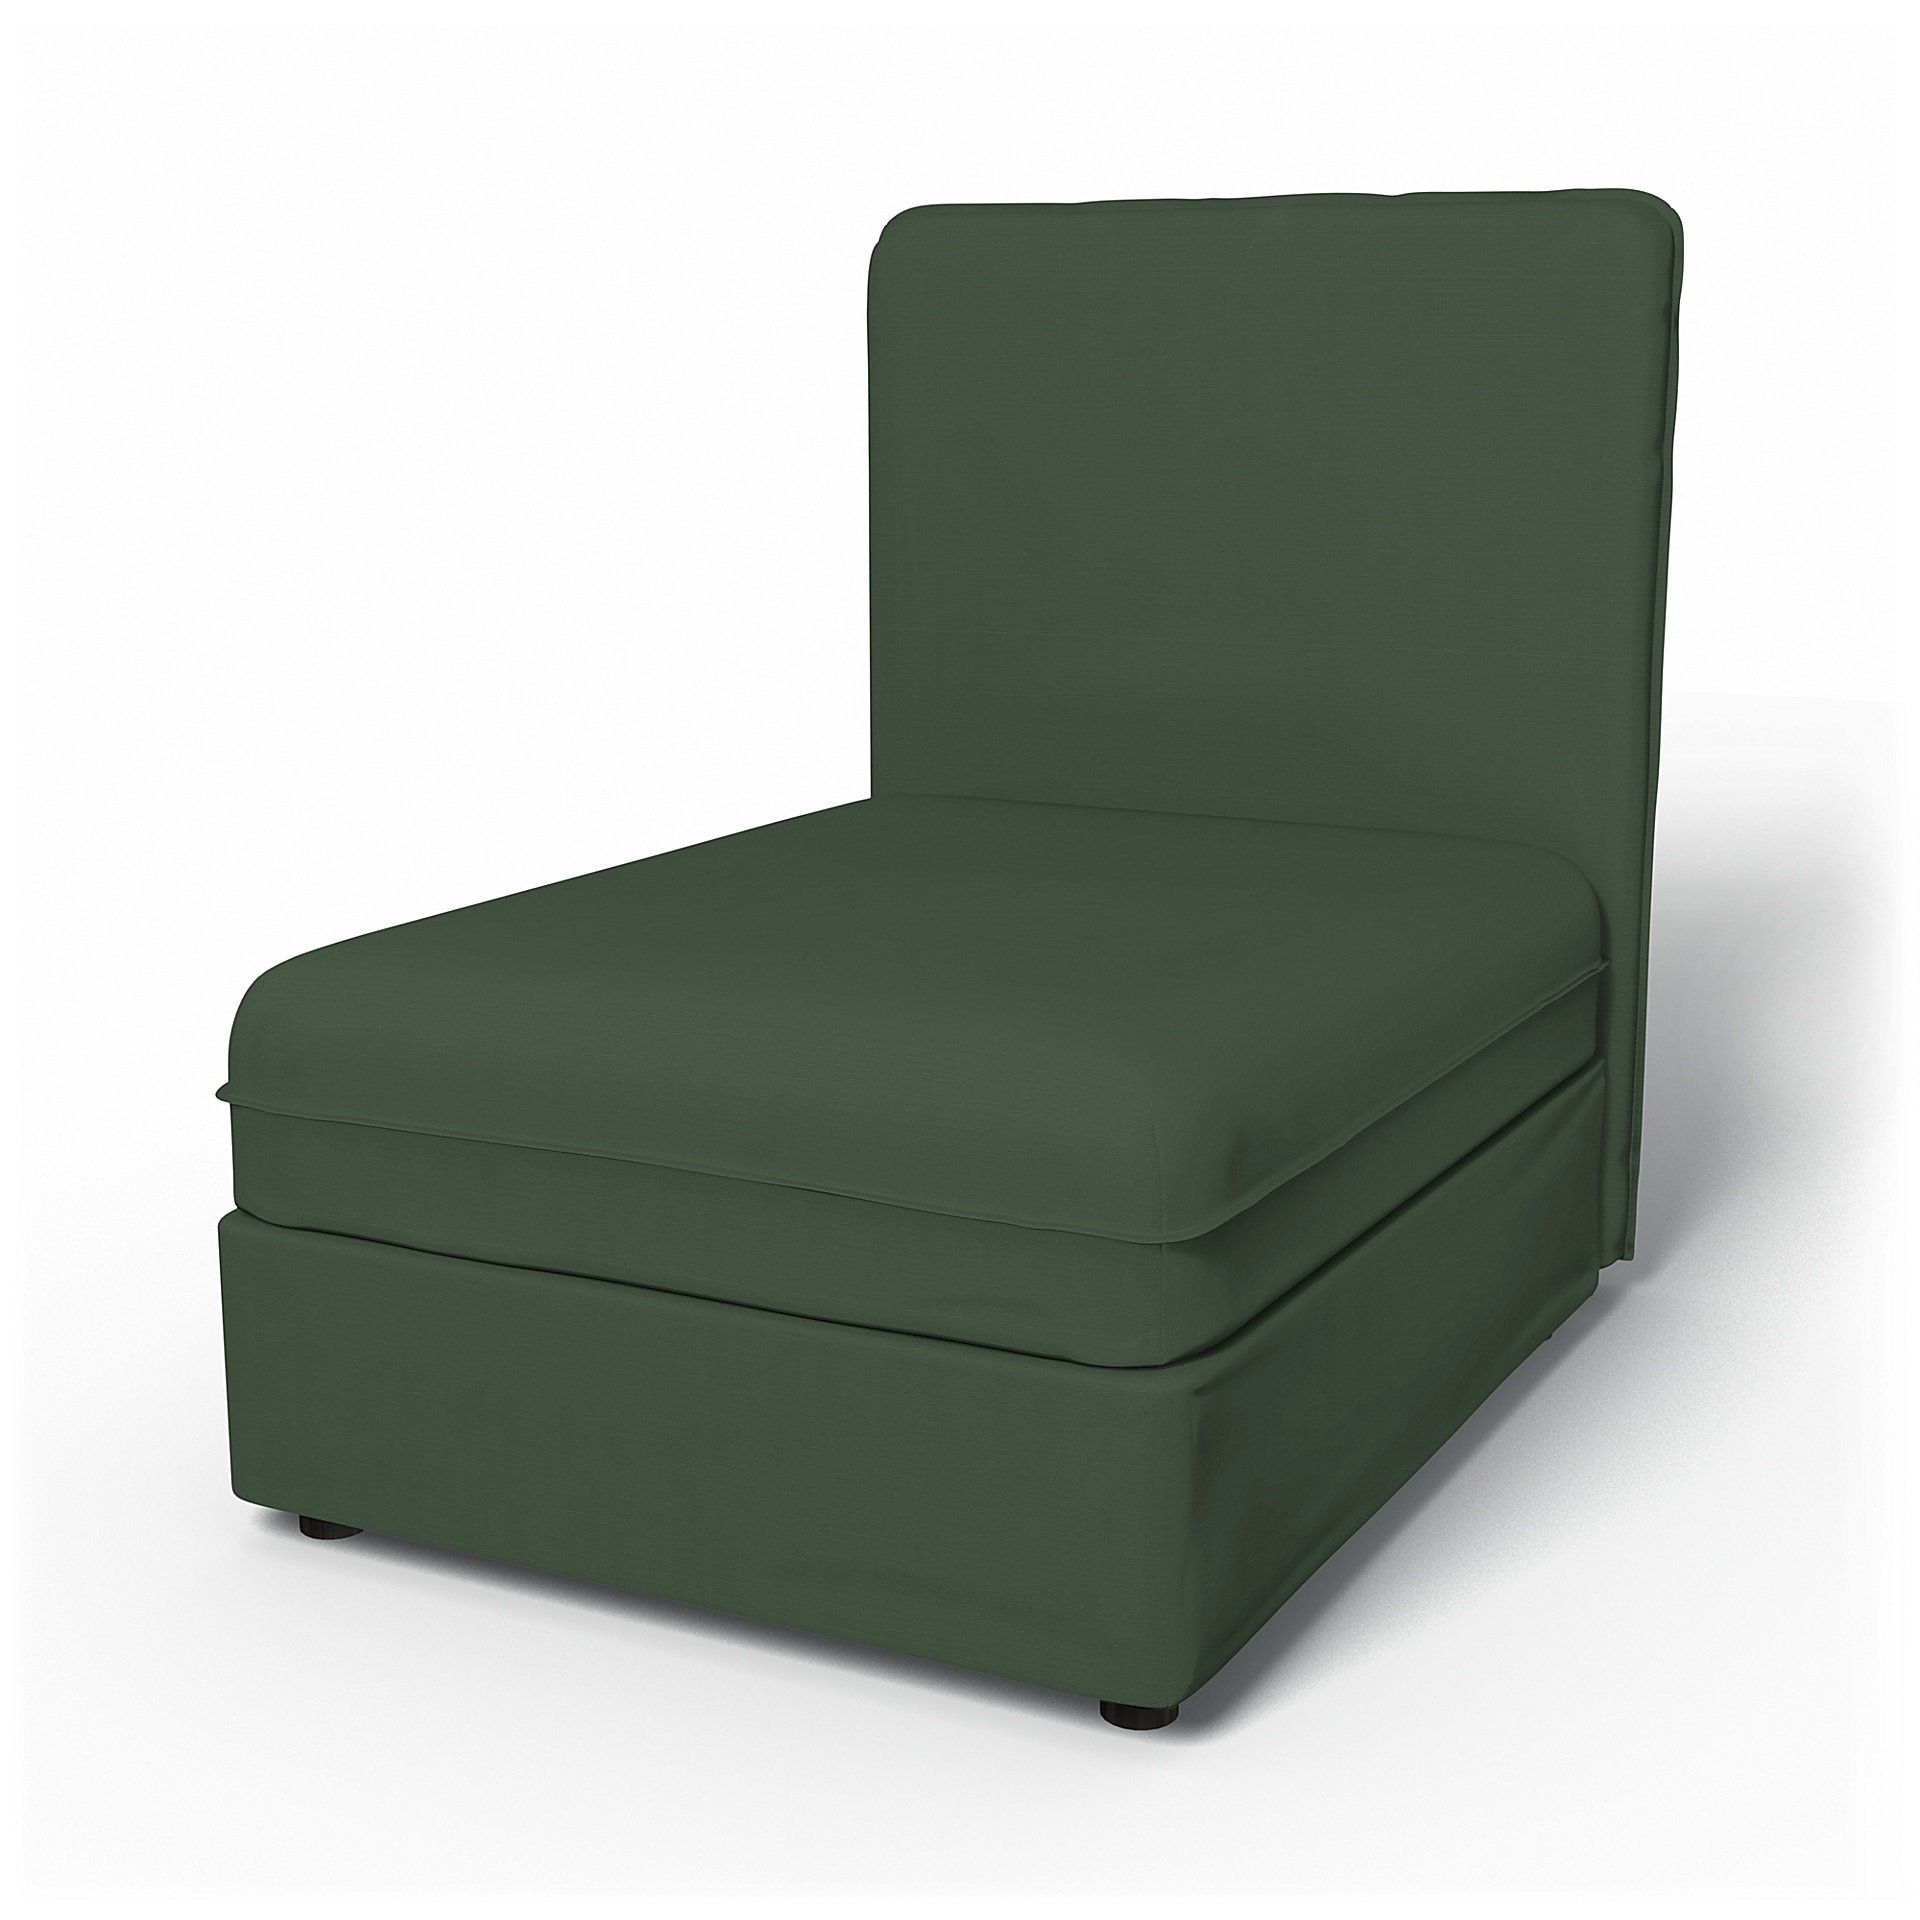 IKEA - Vallentuna Seat Module with High Back Cover 80x100cm 32x32in, Thyme, Cotton - Bemz